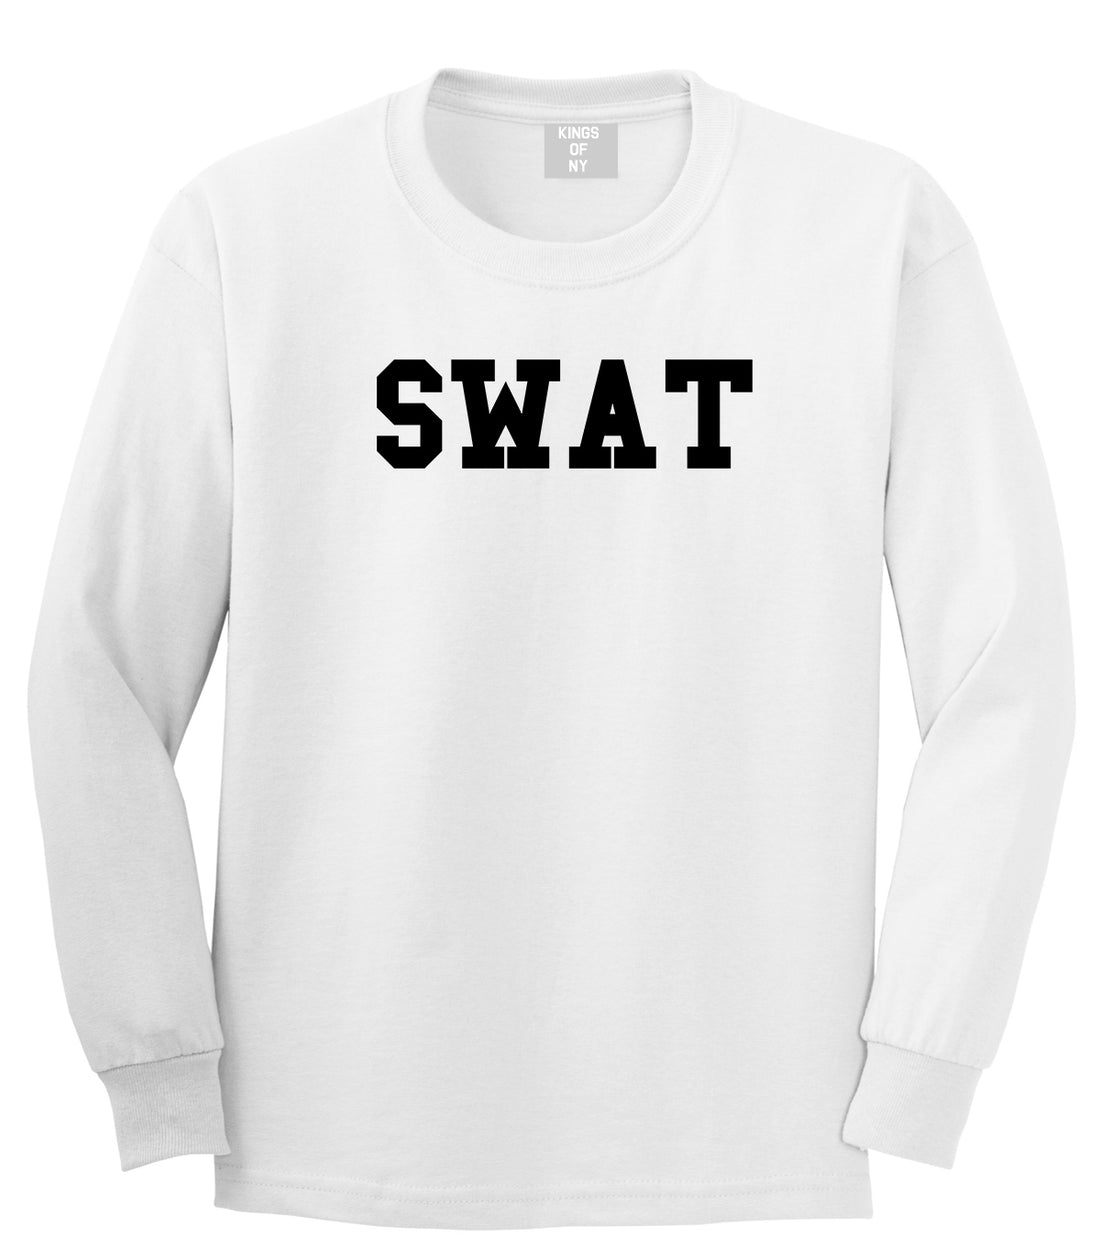 Swat Law Enforcement Mens White Long Sleeve T-Shirt by KINGS OF NY